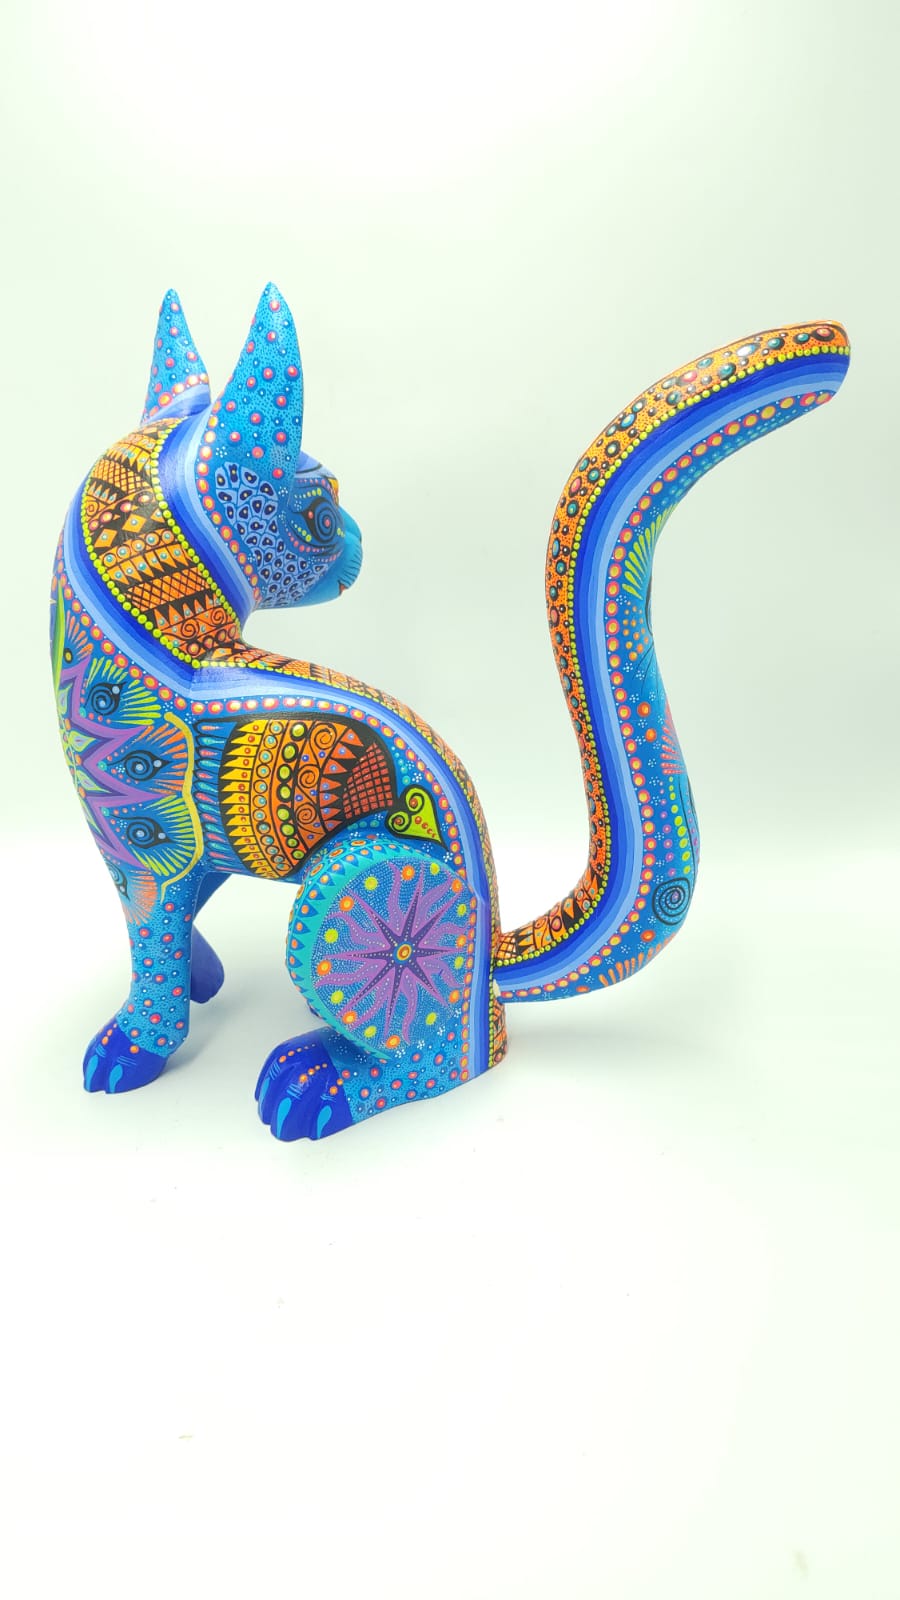 Oaxacan Wood Carving Alebrije Nahual Hand Made Cat By Luis Sosa